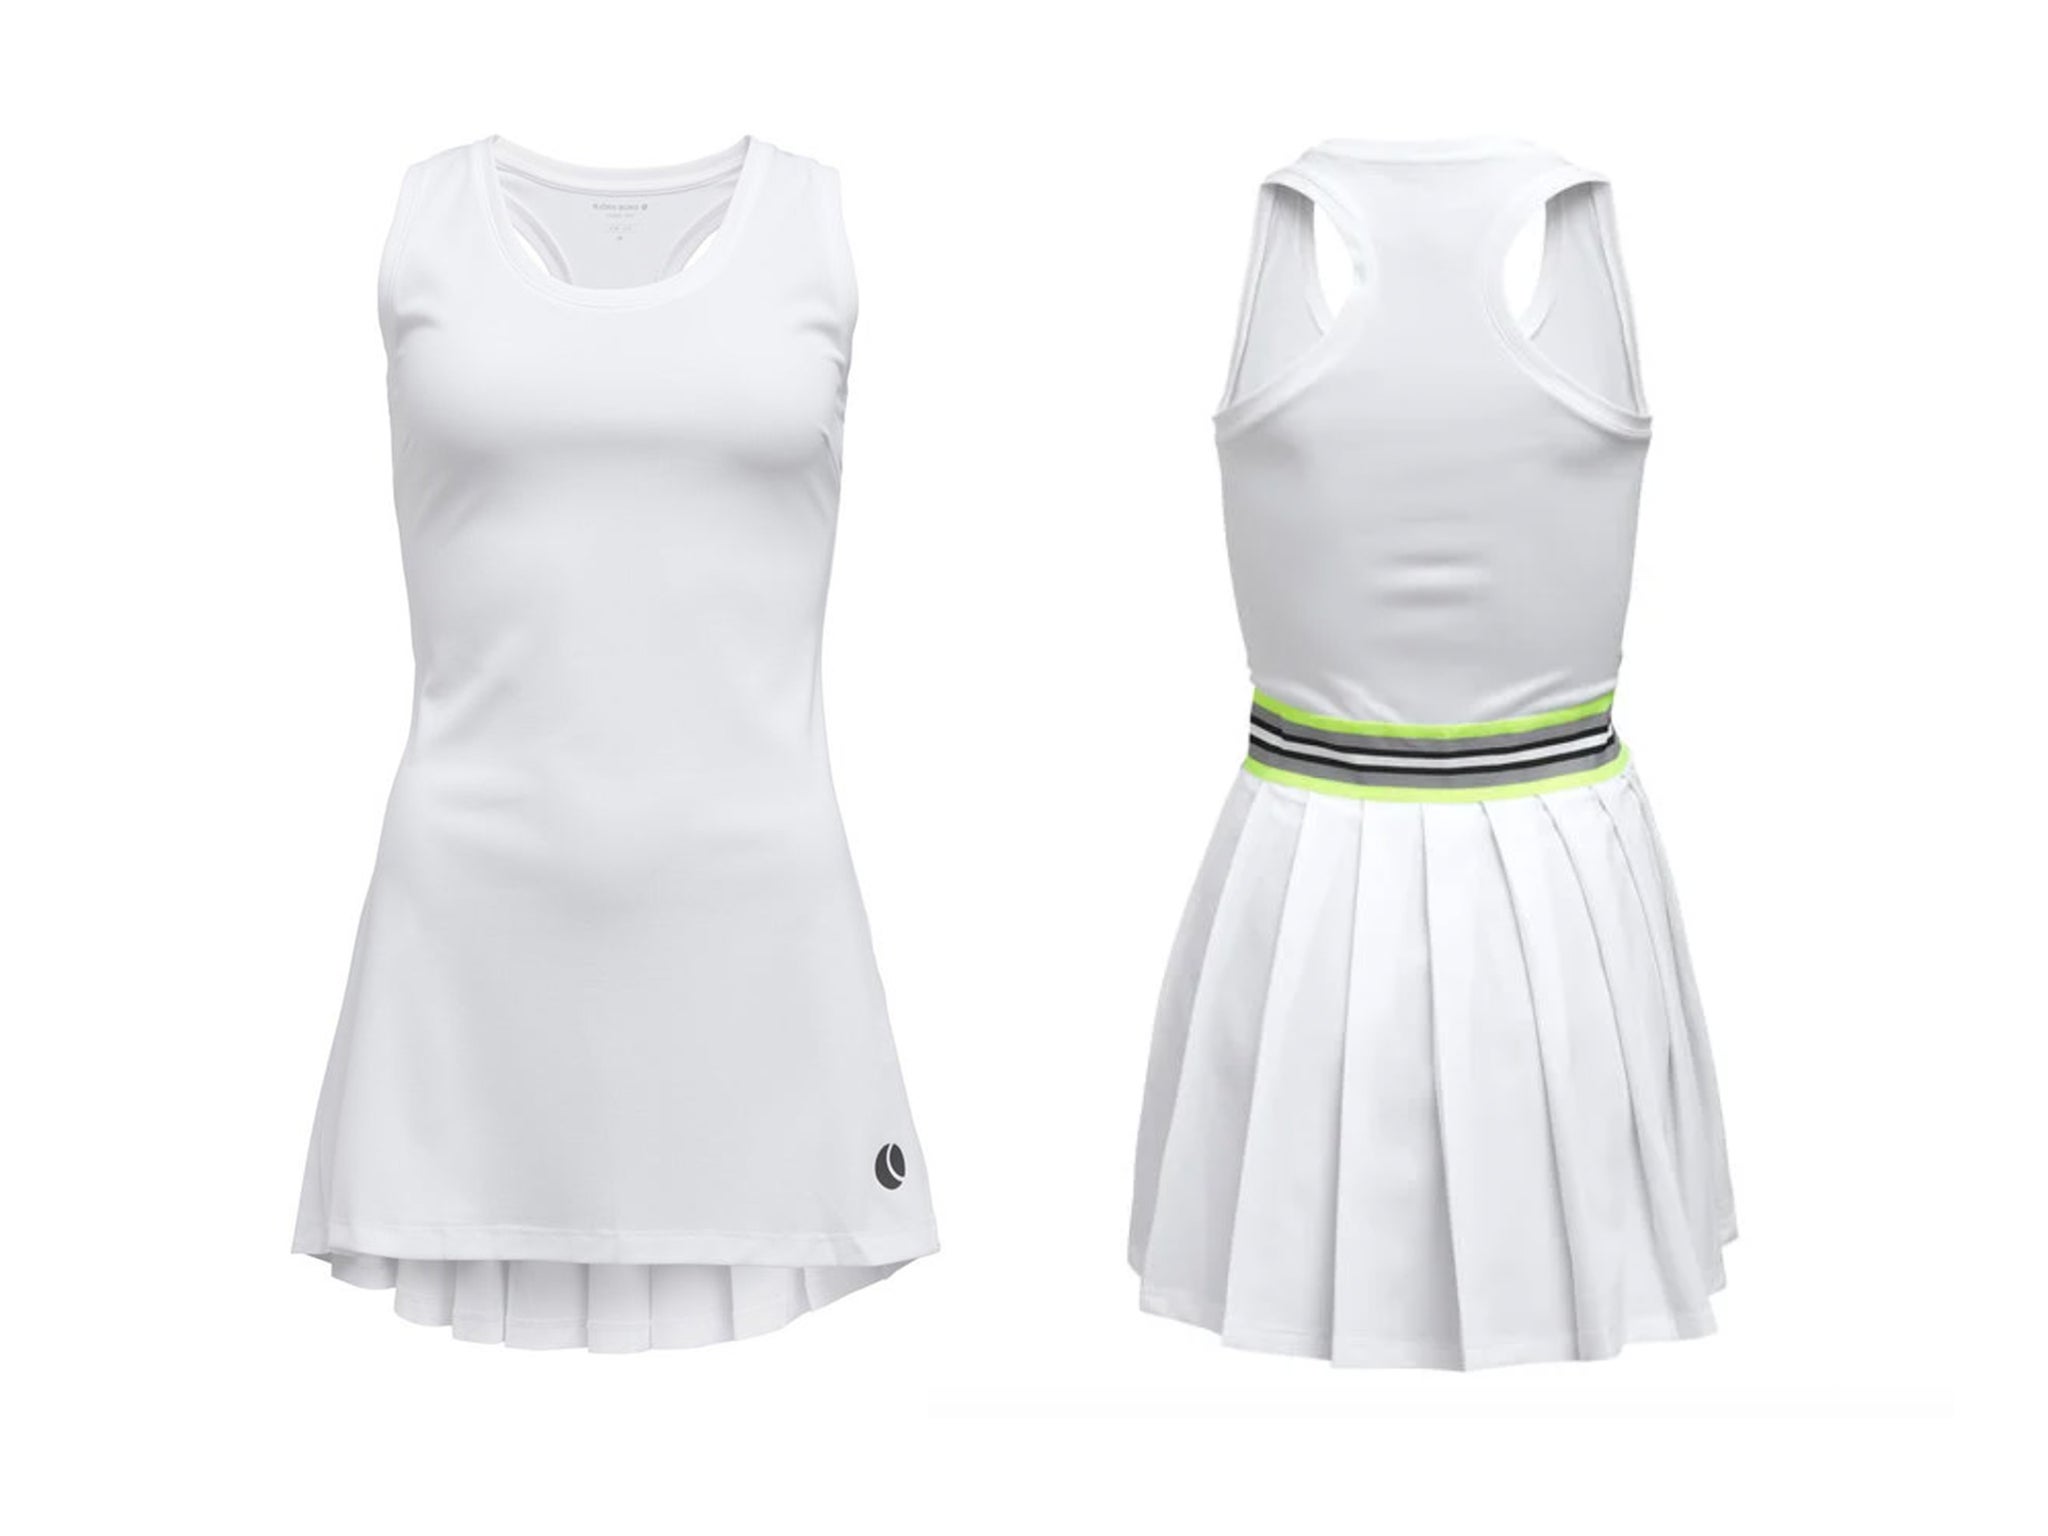 Get into the spirit of Wimbledon with an all-white tennis outfit